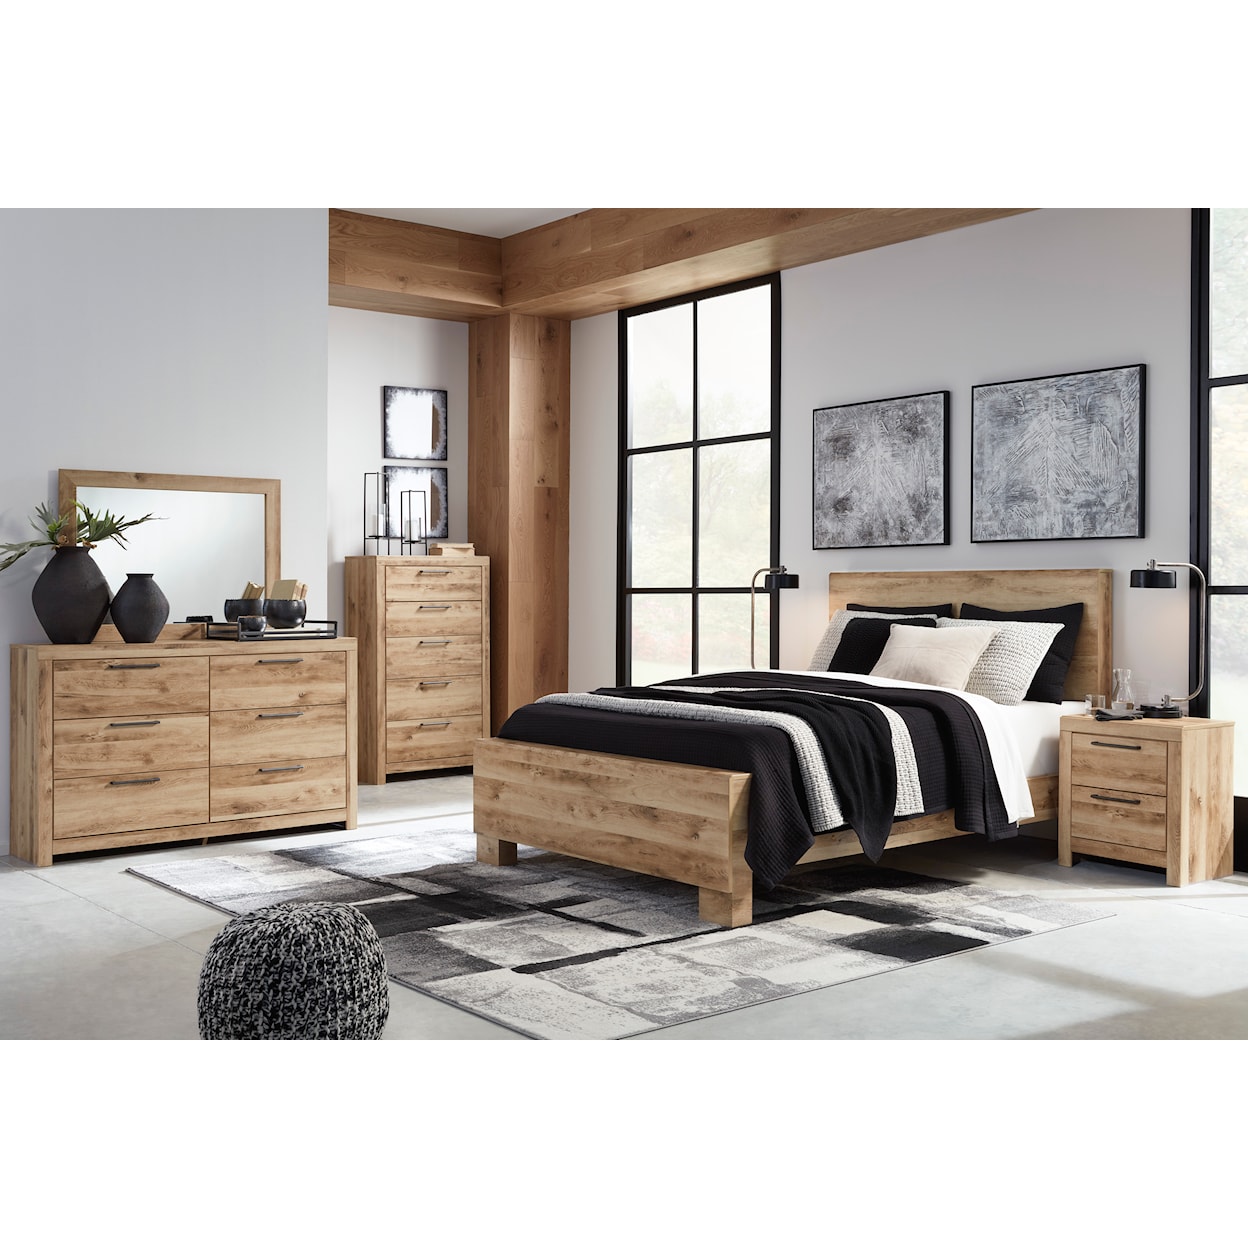 Benchcraft Hyanna King Panel Bed